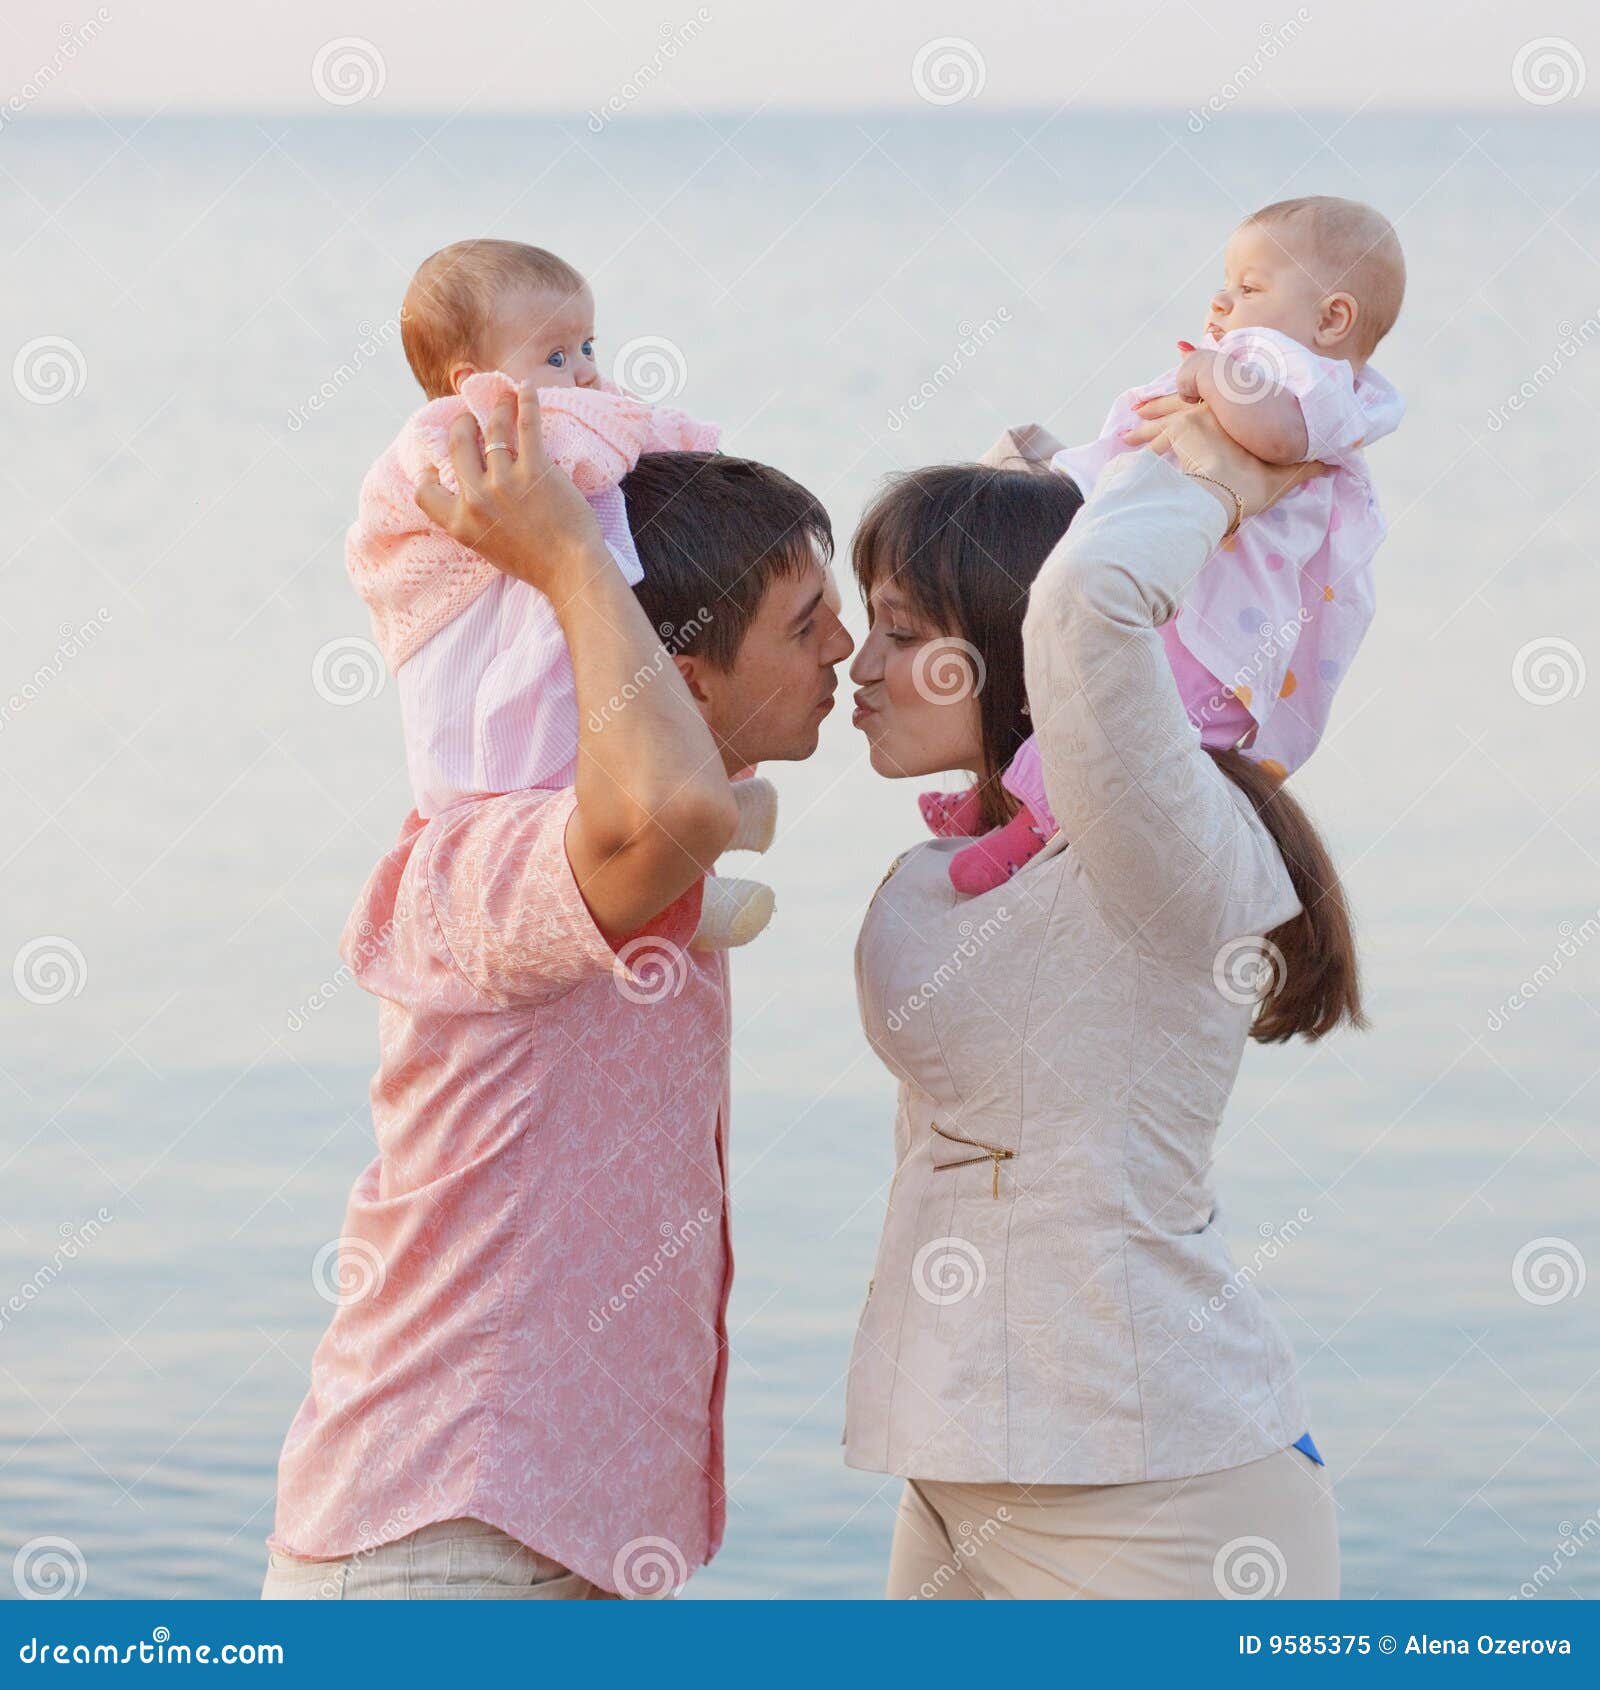 young parents with children